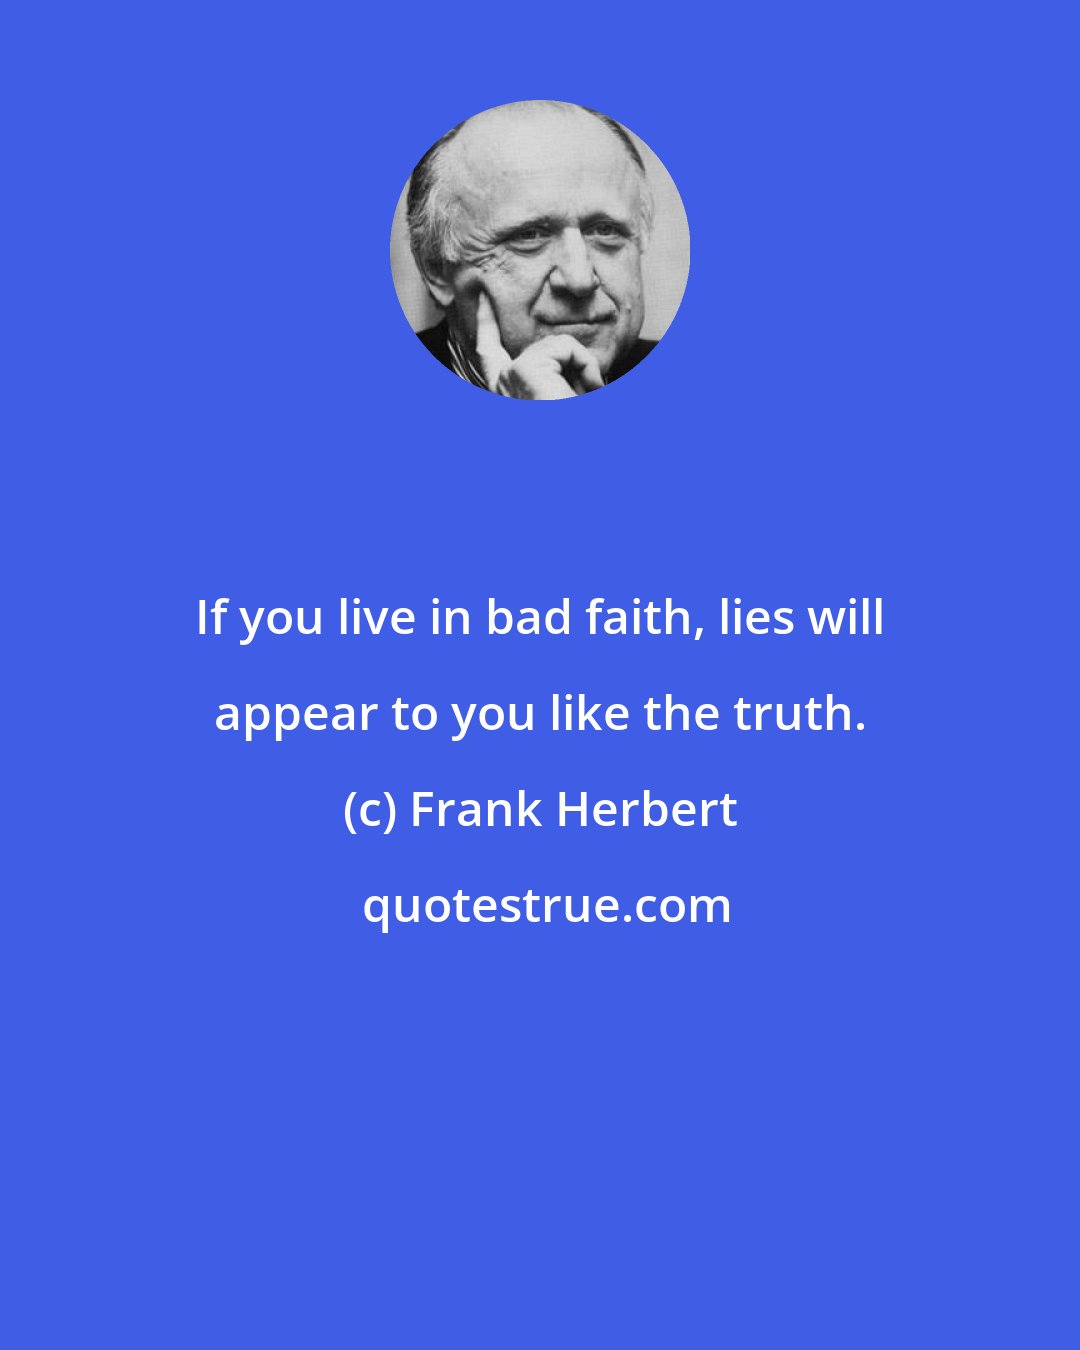 Frank Herbert: If you live in bad faith, lies will appear to you like the truth.